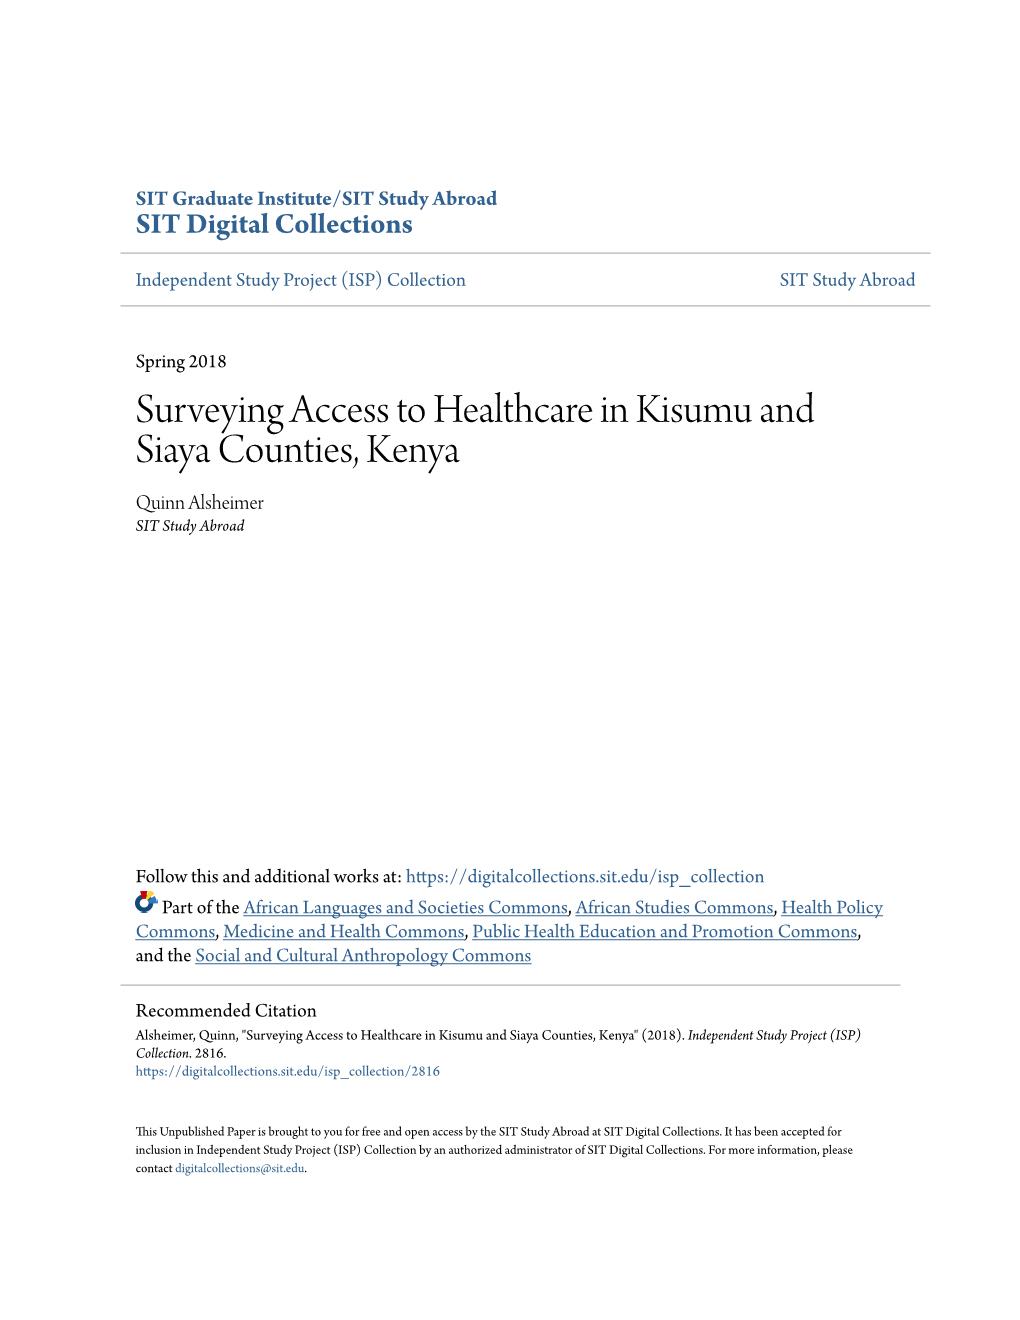 Surveying Access to Healthcare in Kisumu and Siaya Counties, Kenya Quinn Alsheimer SIT Study Abroad